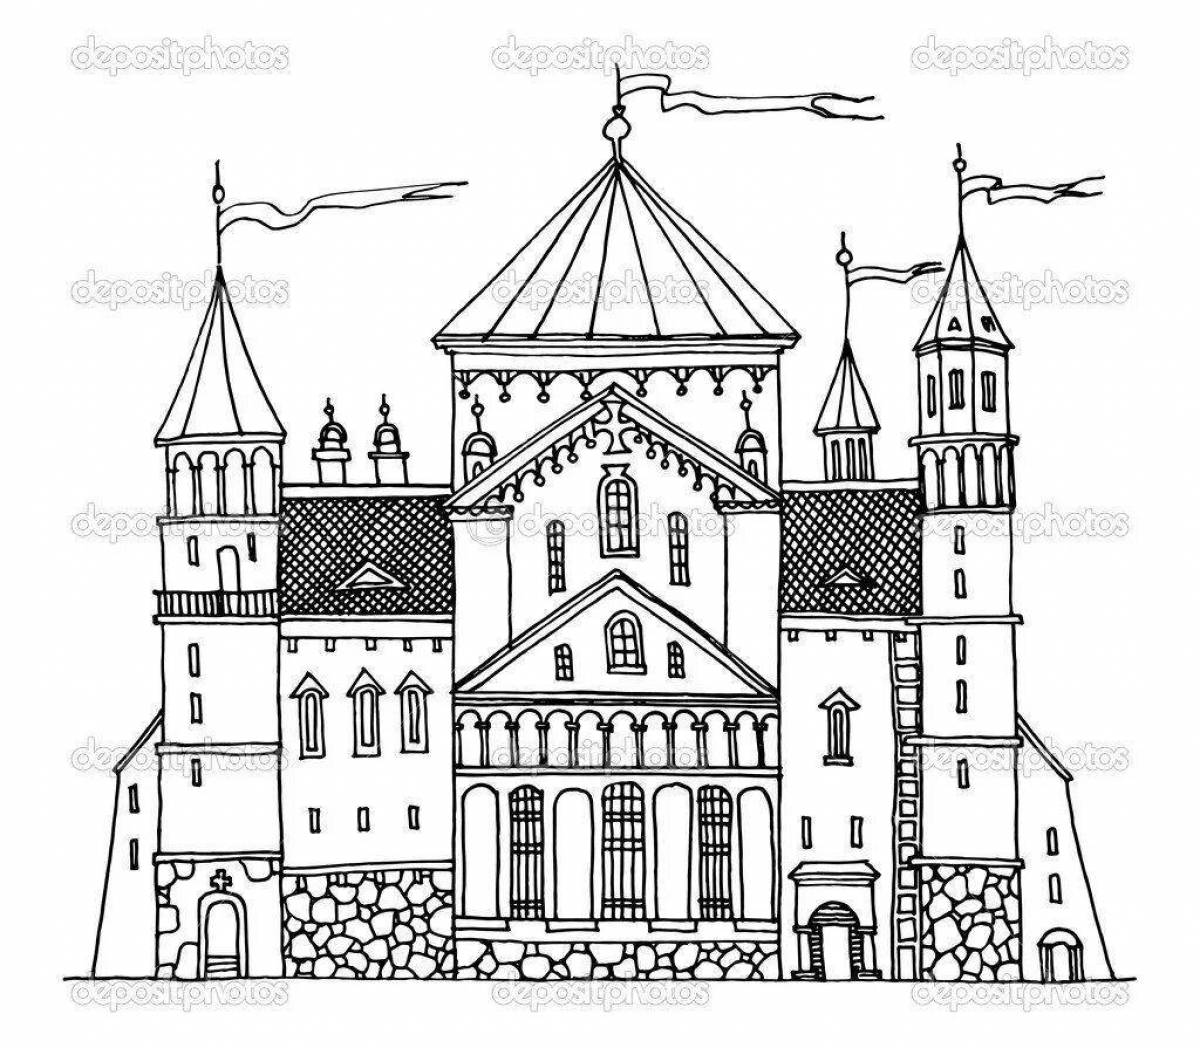 Coloring page charming gothic castle